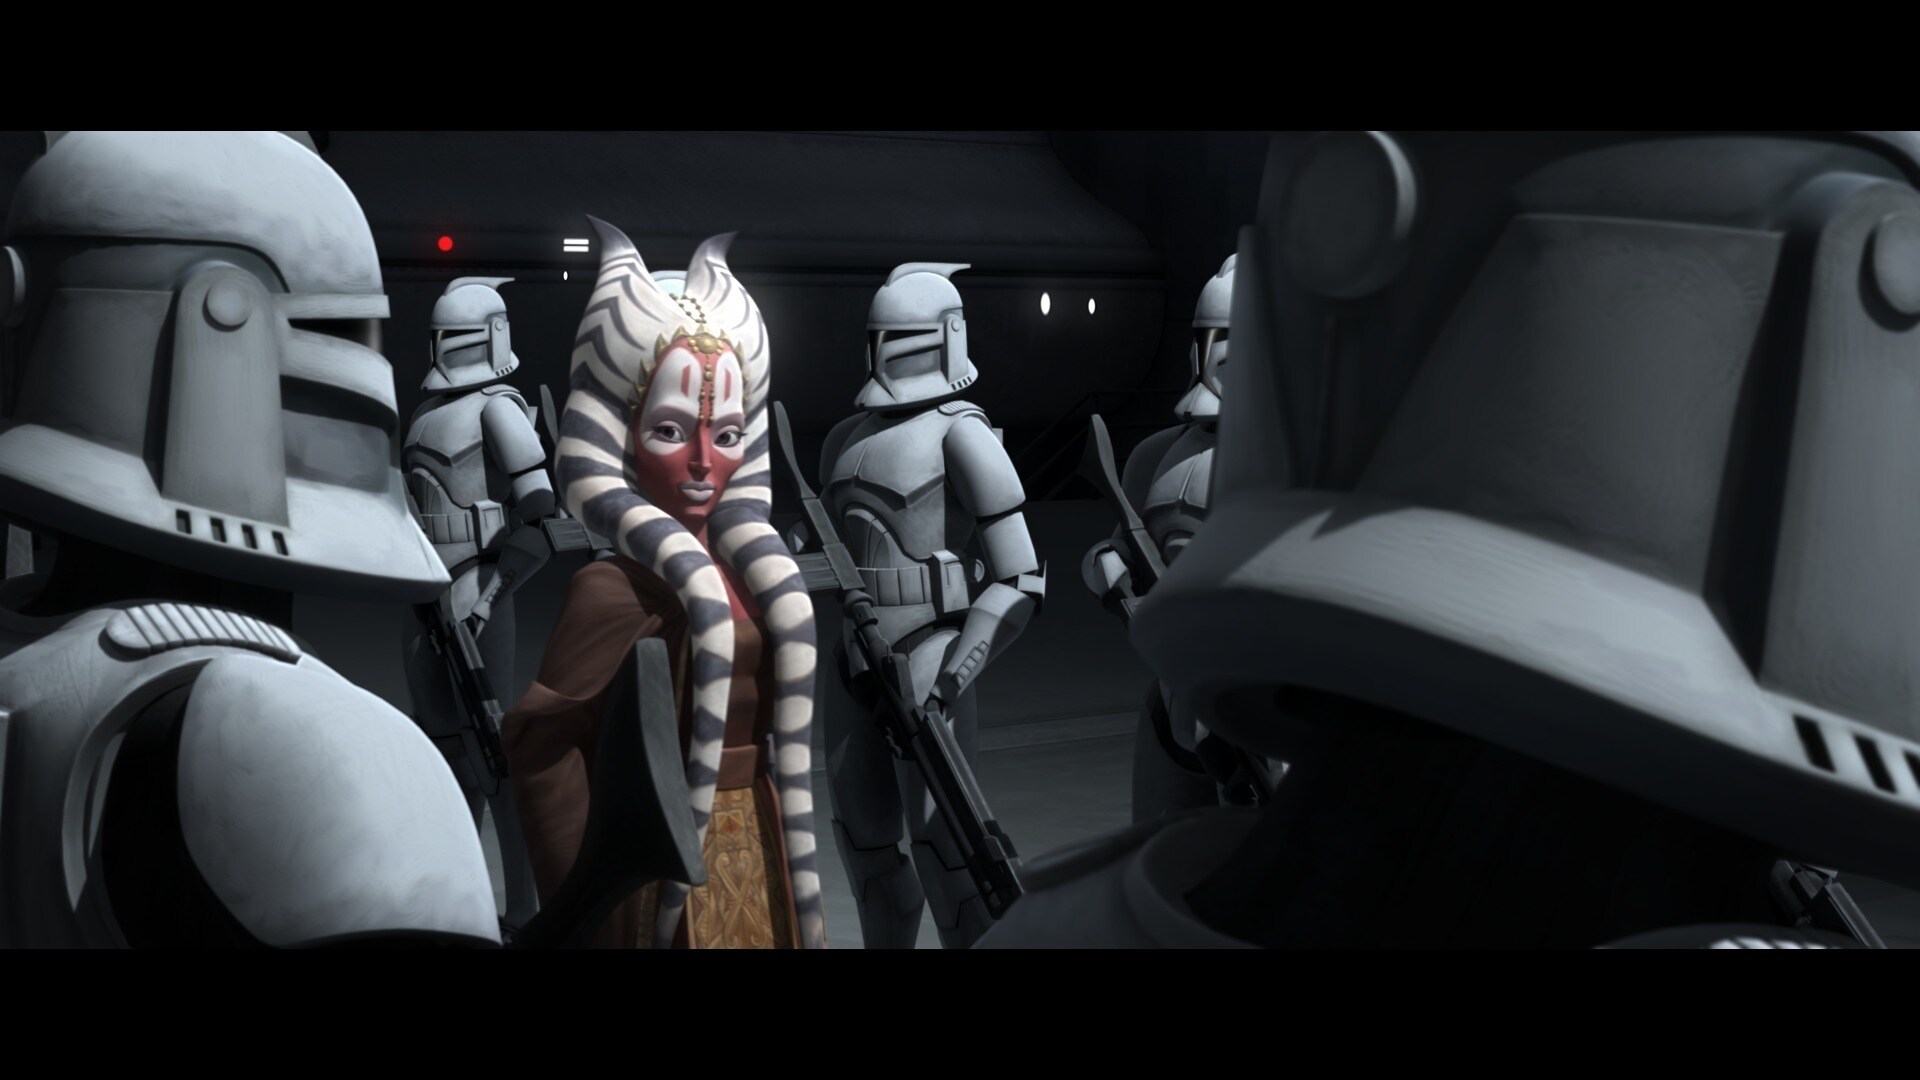 Fives makes mention of being helped by Shaak Ti during his training. This is a reference to the S...